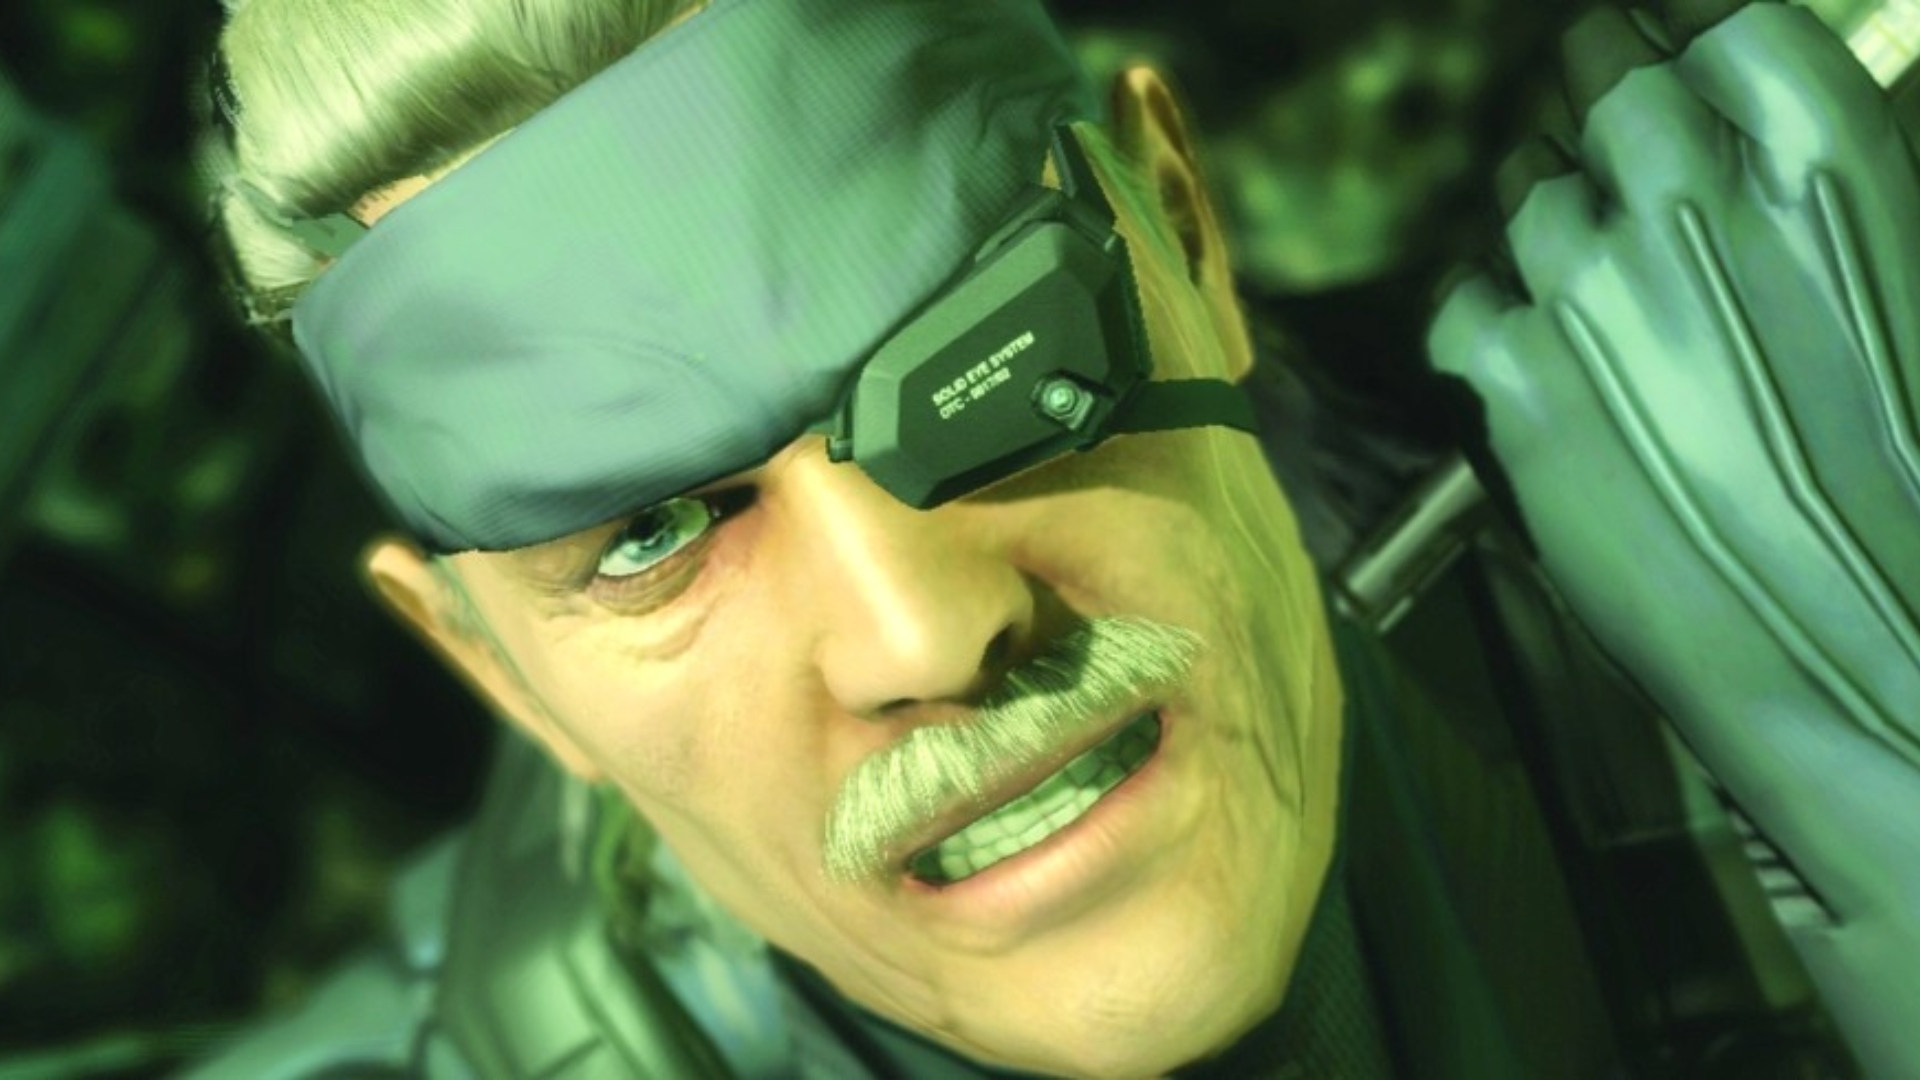 Metal Gear Solid 4 might be coming to PC, and there's proof